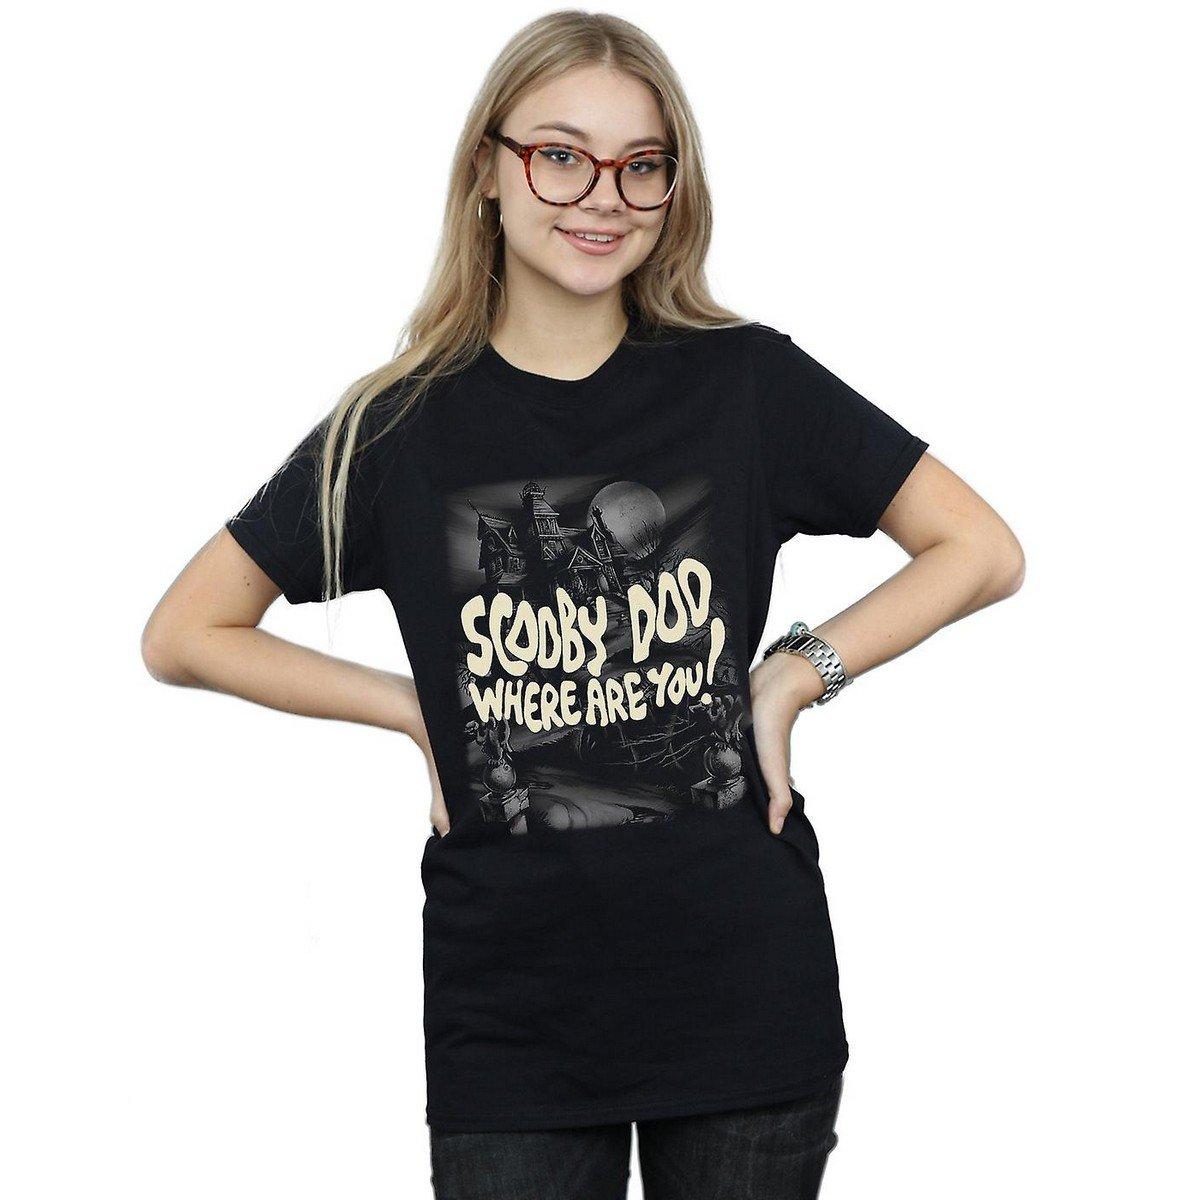 SCOOBY DOO  Where Are You? TShirt 